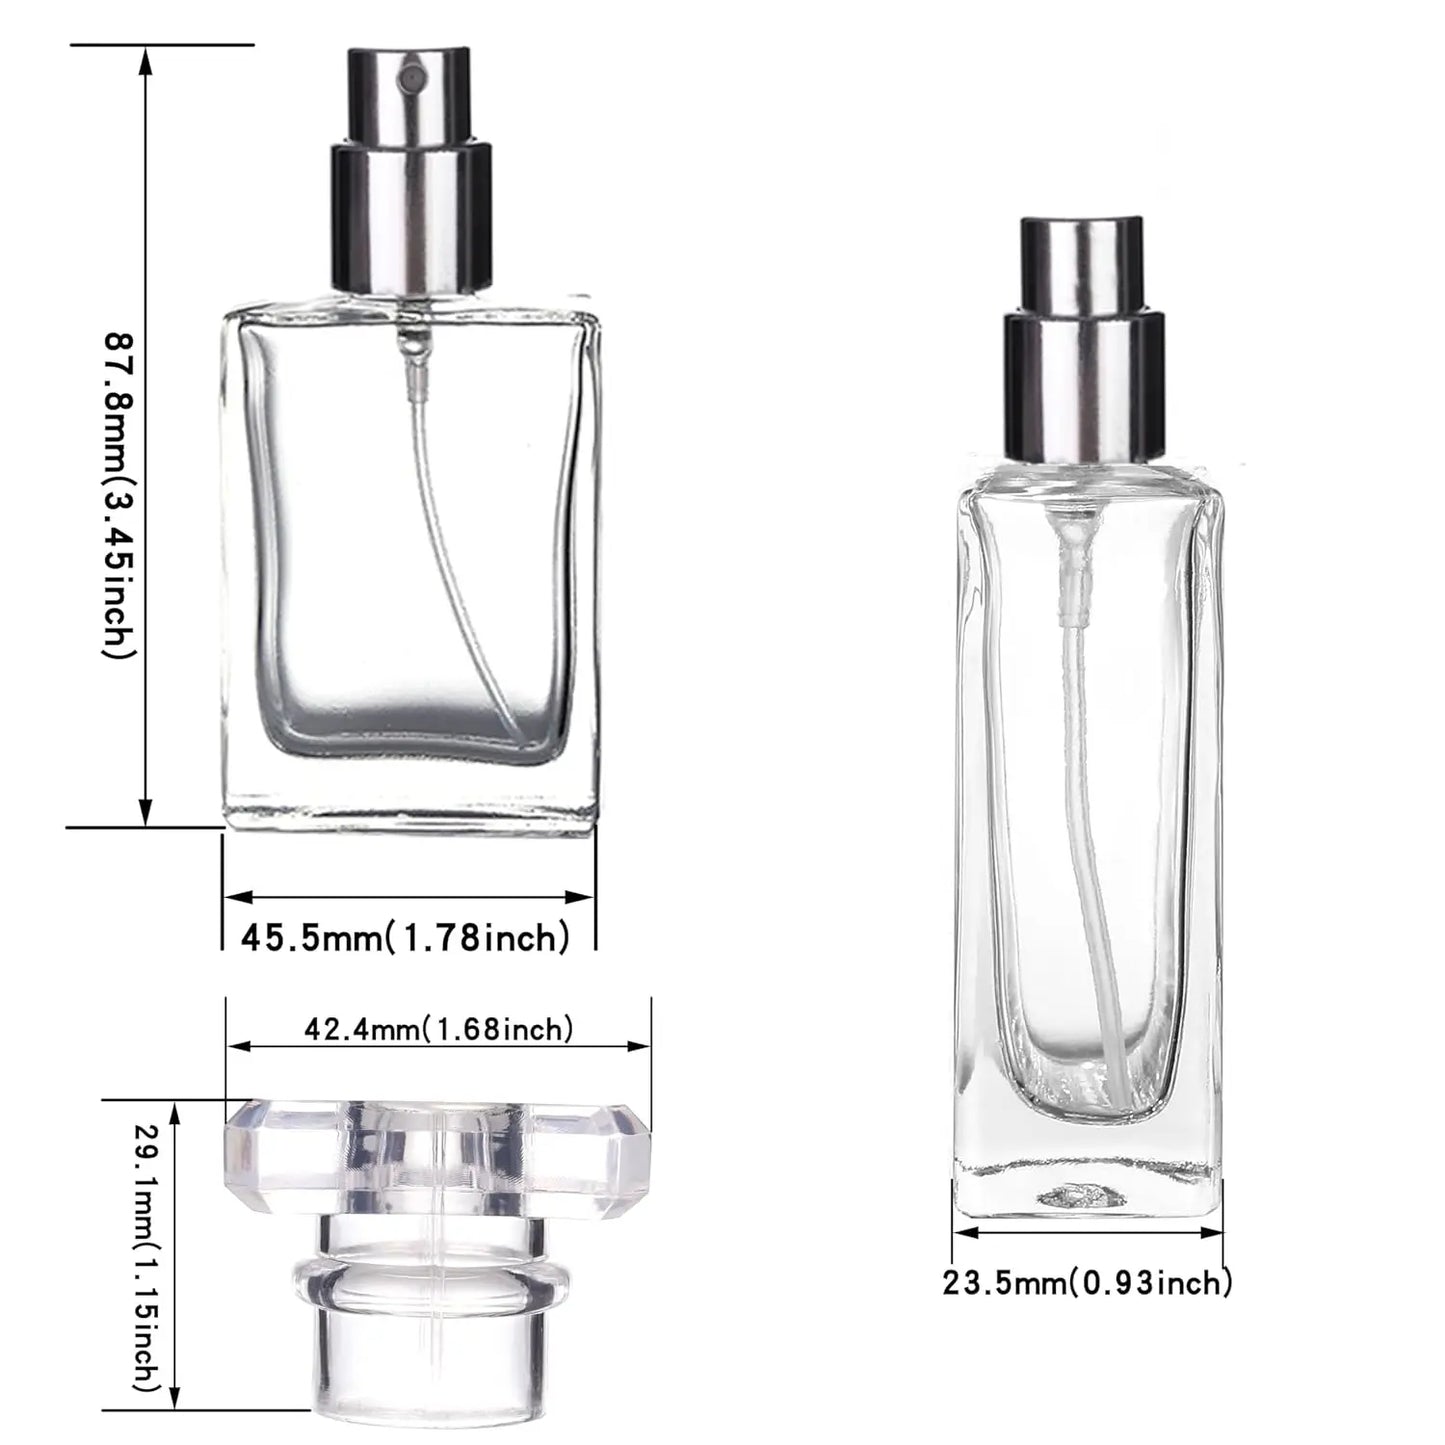 dimensions of the 1 oz cologne bottle